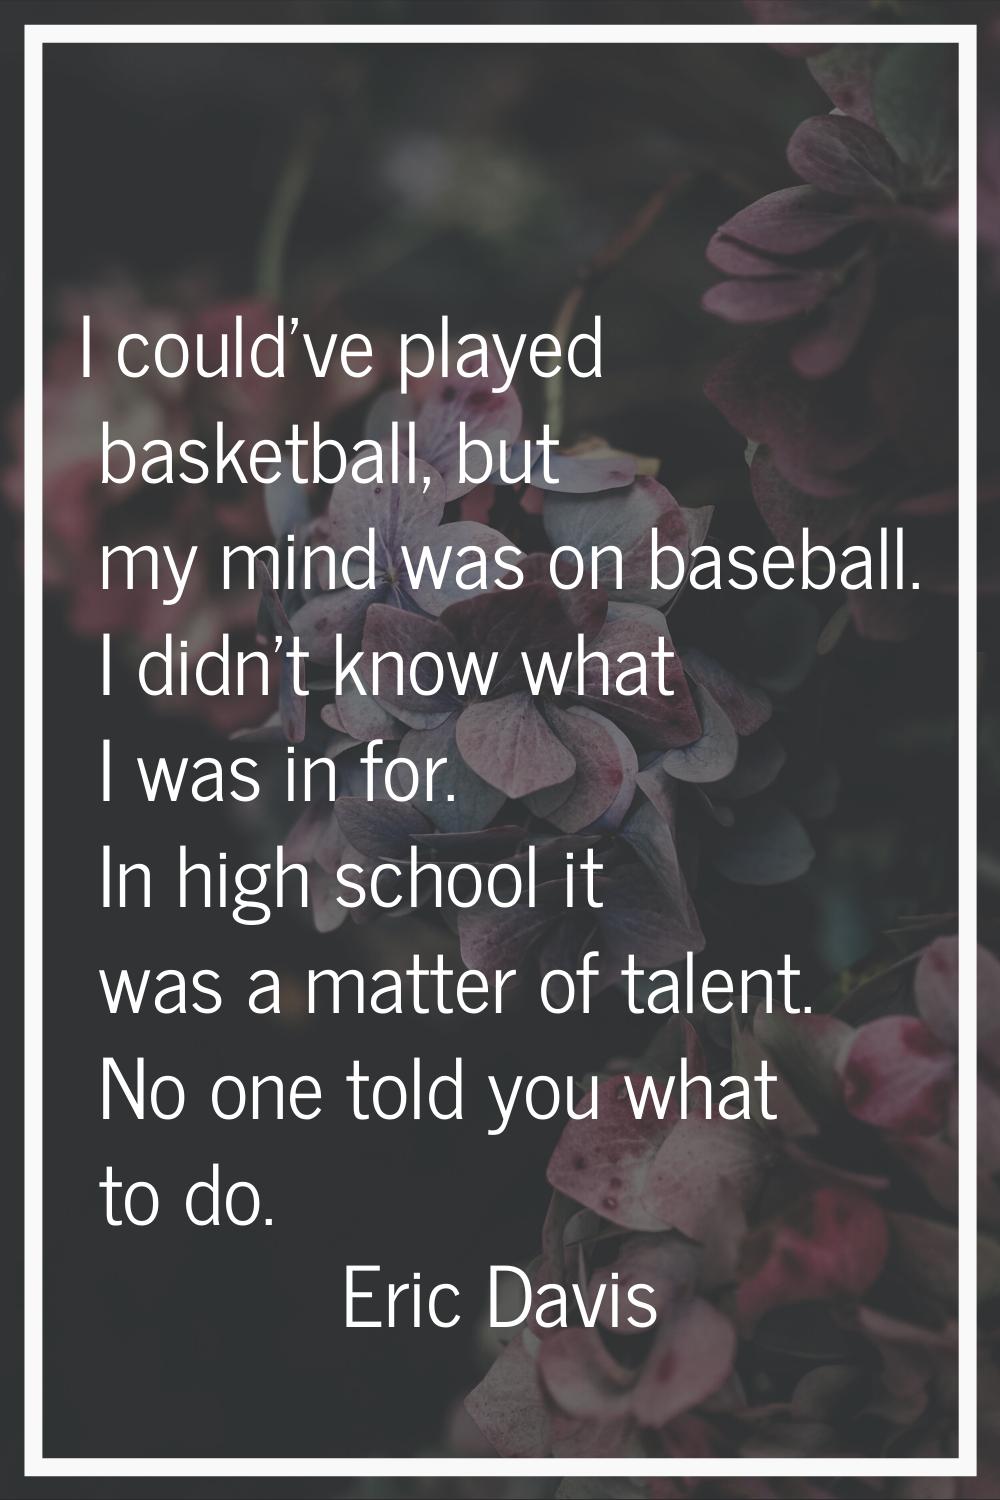 I could've played basketball, but my mind was on baseball. I didn't know what I was in for. In high